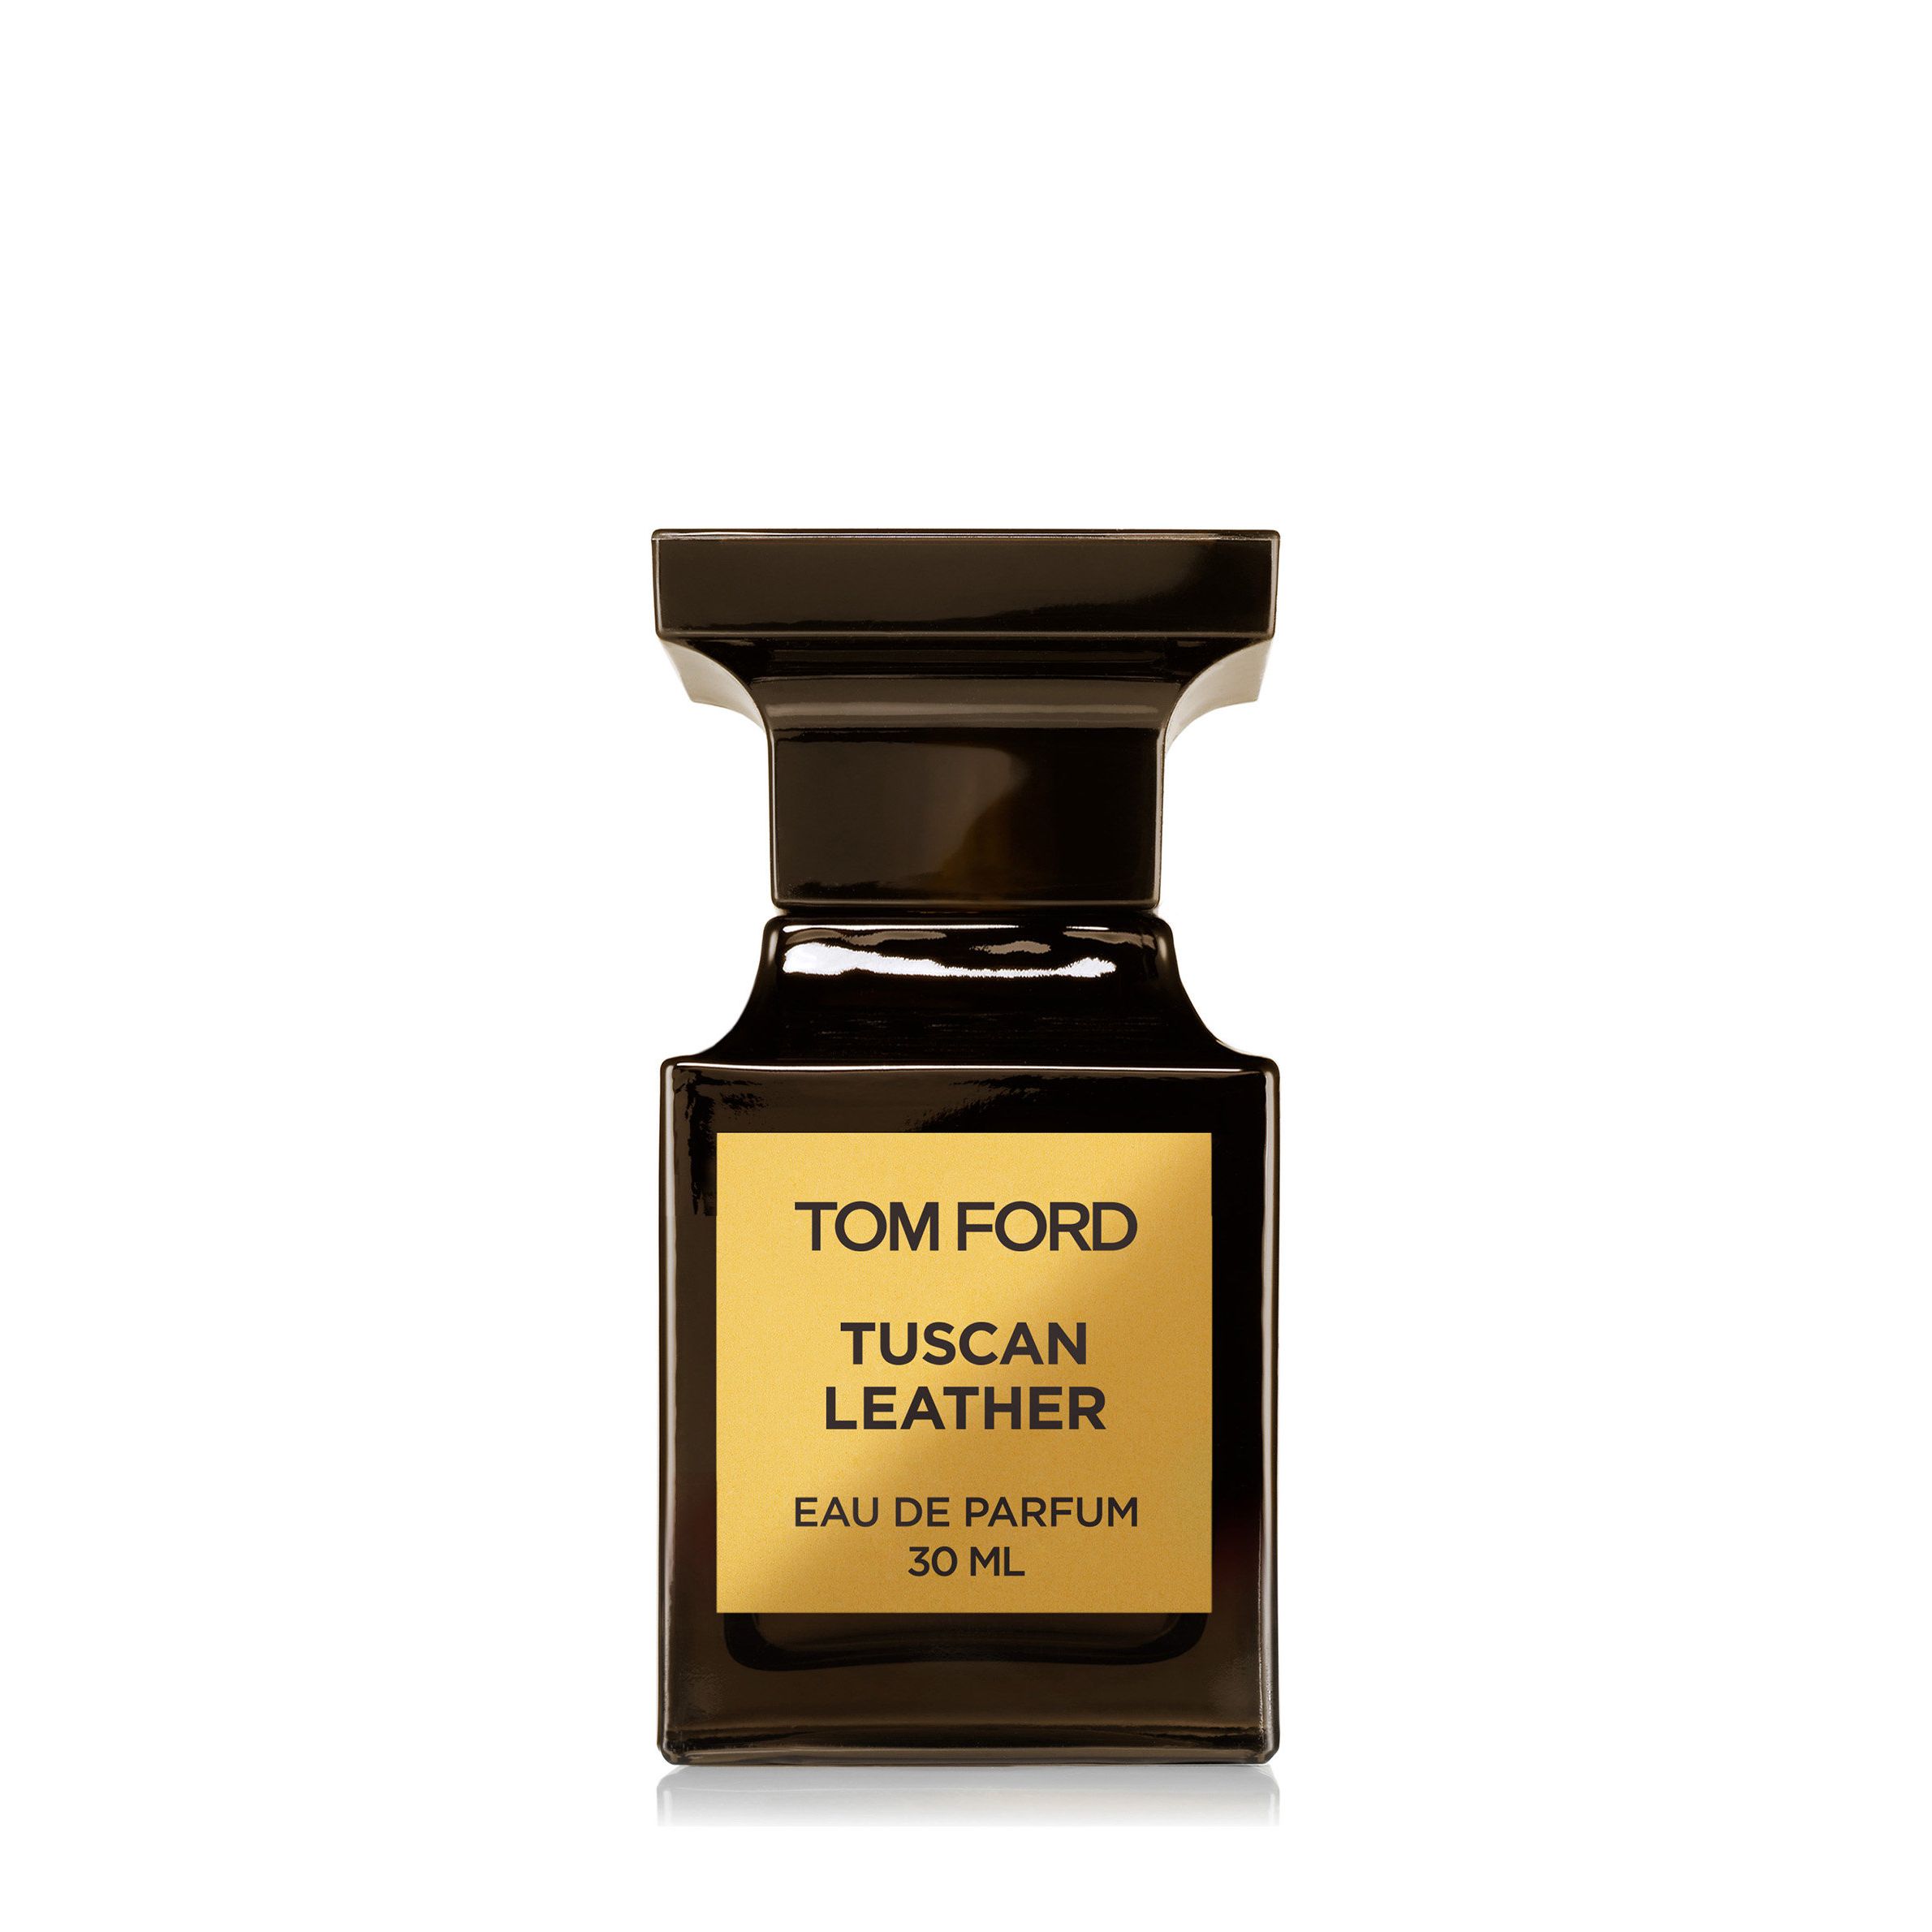 Парфюмерная вода TOM FORD Tuscan leather EDP унисекс, 30 мл kigoauto 4b fo38 blade remote key shell 164 r8073 for ford edge escape fusion mustang expedition xlt 2007 2008 2009 2010 2011